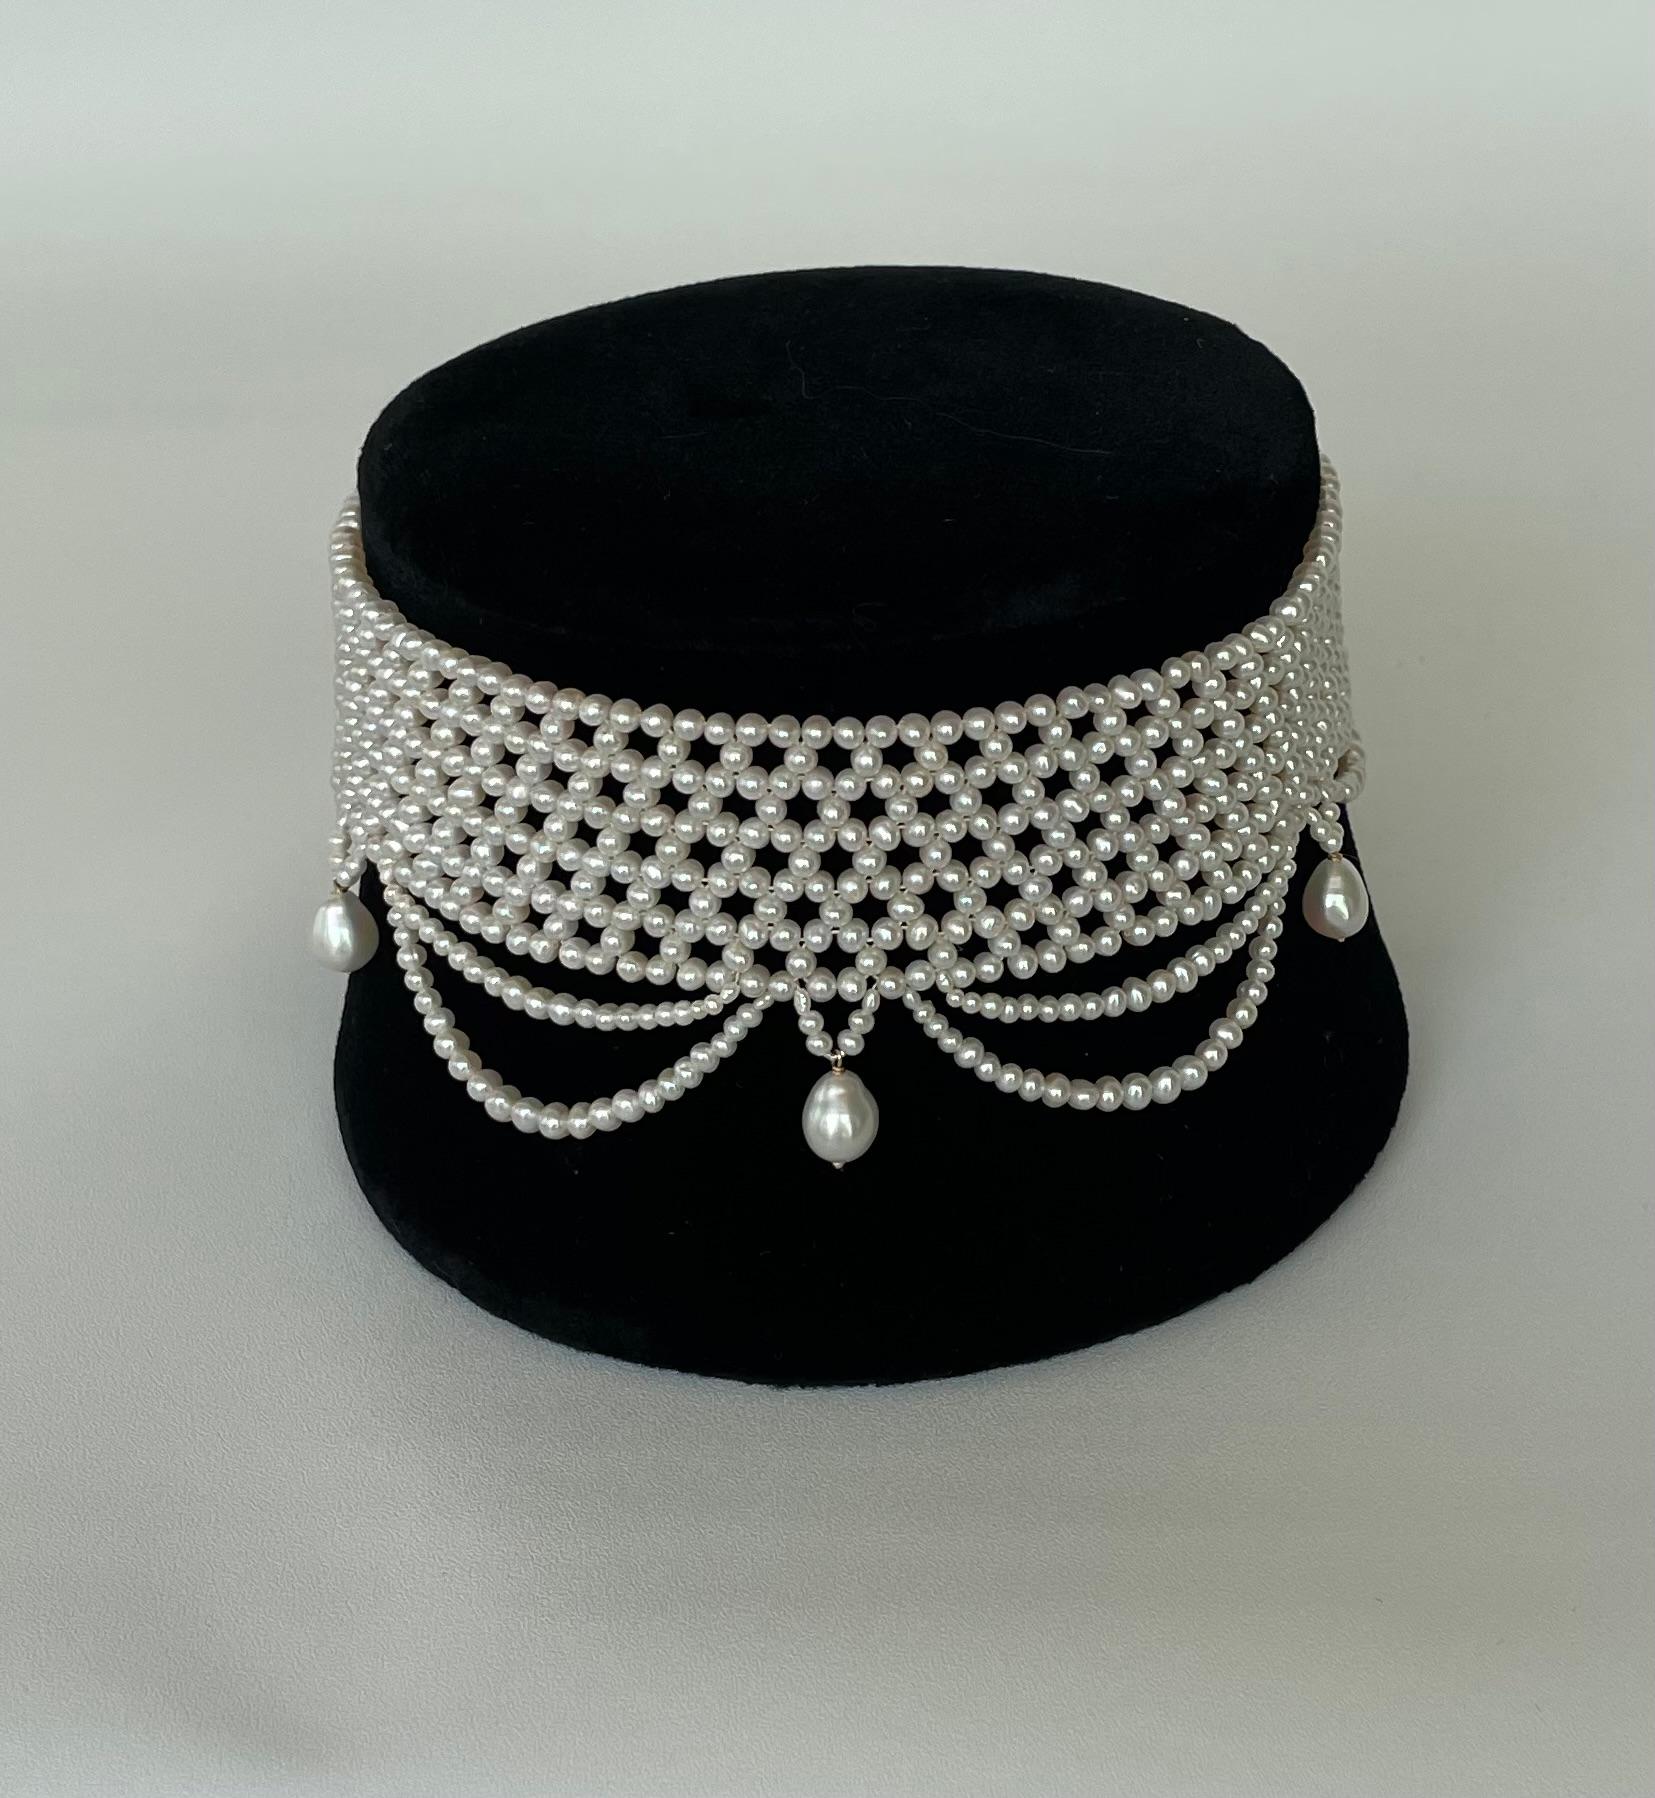 Marina J. Woven Pearl Draped Choker with Pearl Drops and Secure Sliding Clasp For Sale 4